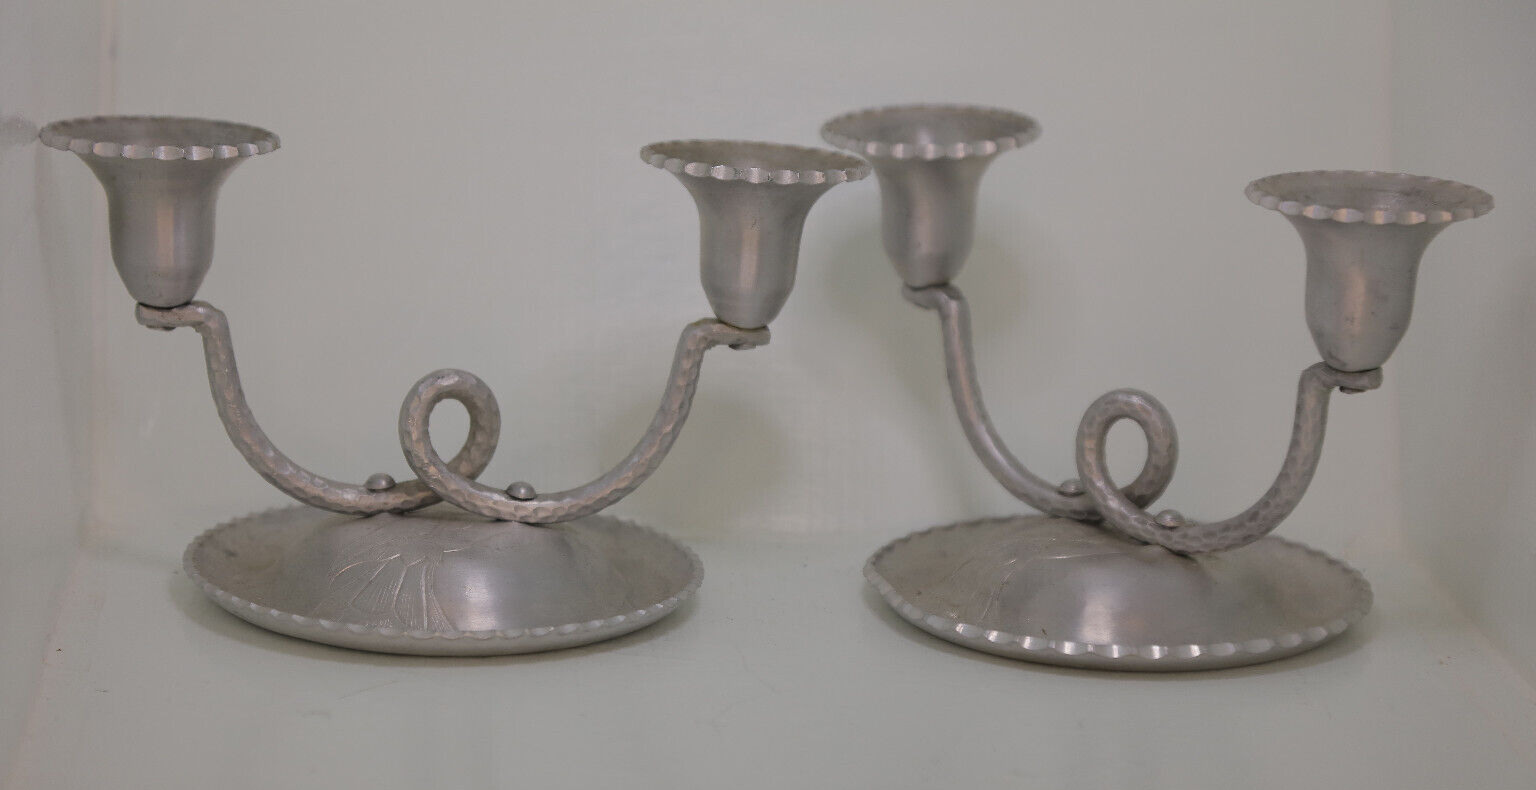 Aluminum Farberware pair of candlestick holders wrought with a flower pattern